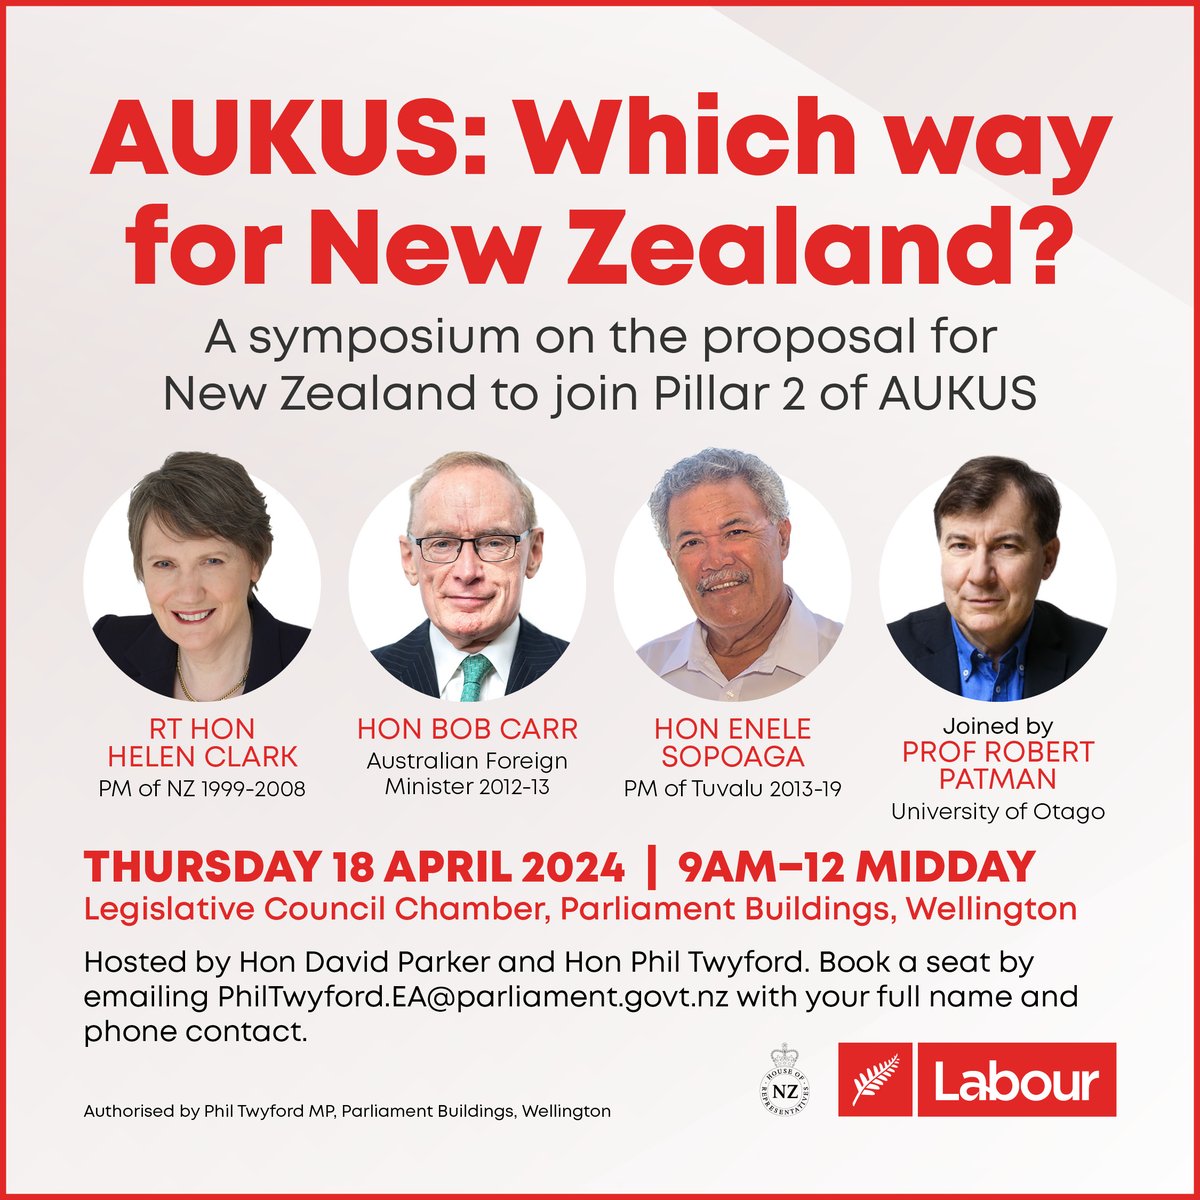 I'll be livestreaming this event right here tomorrow/Thursday from 9am. Hear the perspective of @HelenClarkNZ @bobjcarr and Enele Sopoaga, and then a panel discussion with Prof Robert Patman. In the meantime, this: theconversation.com/have-new-zeala…